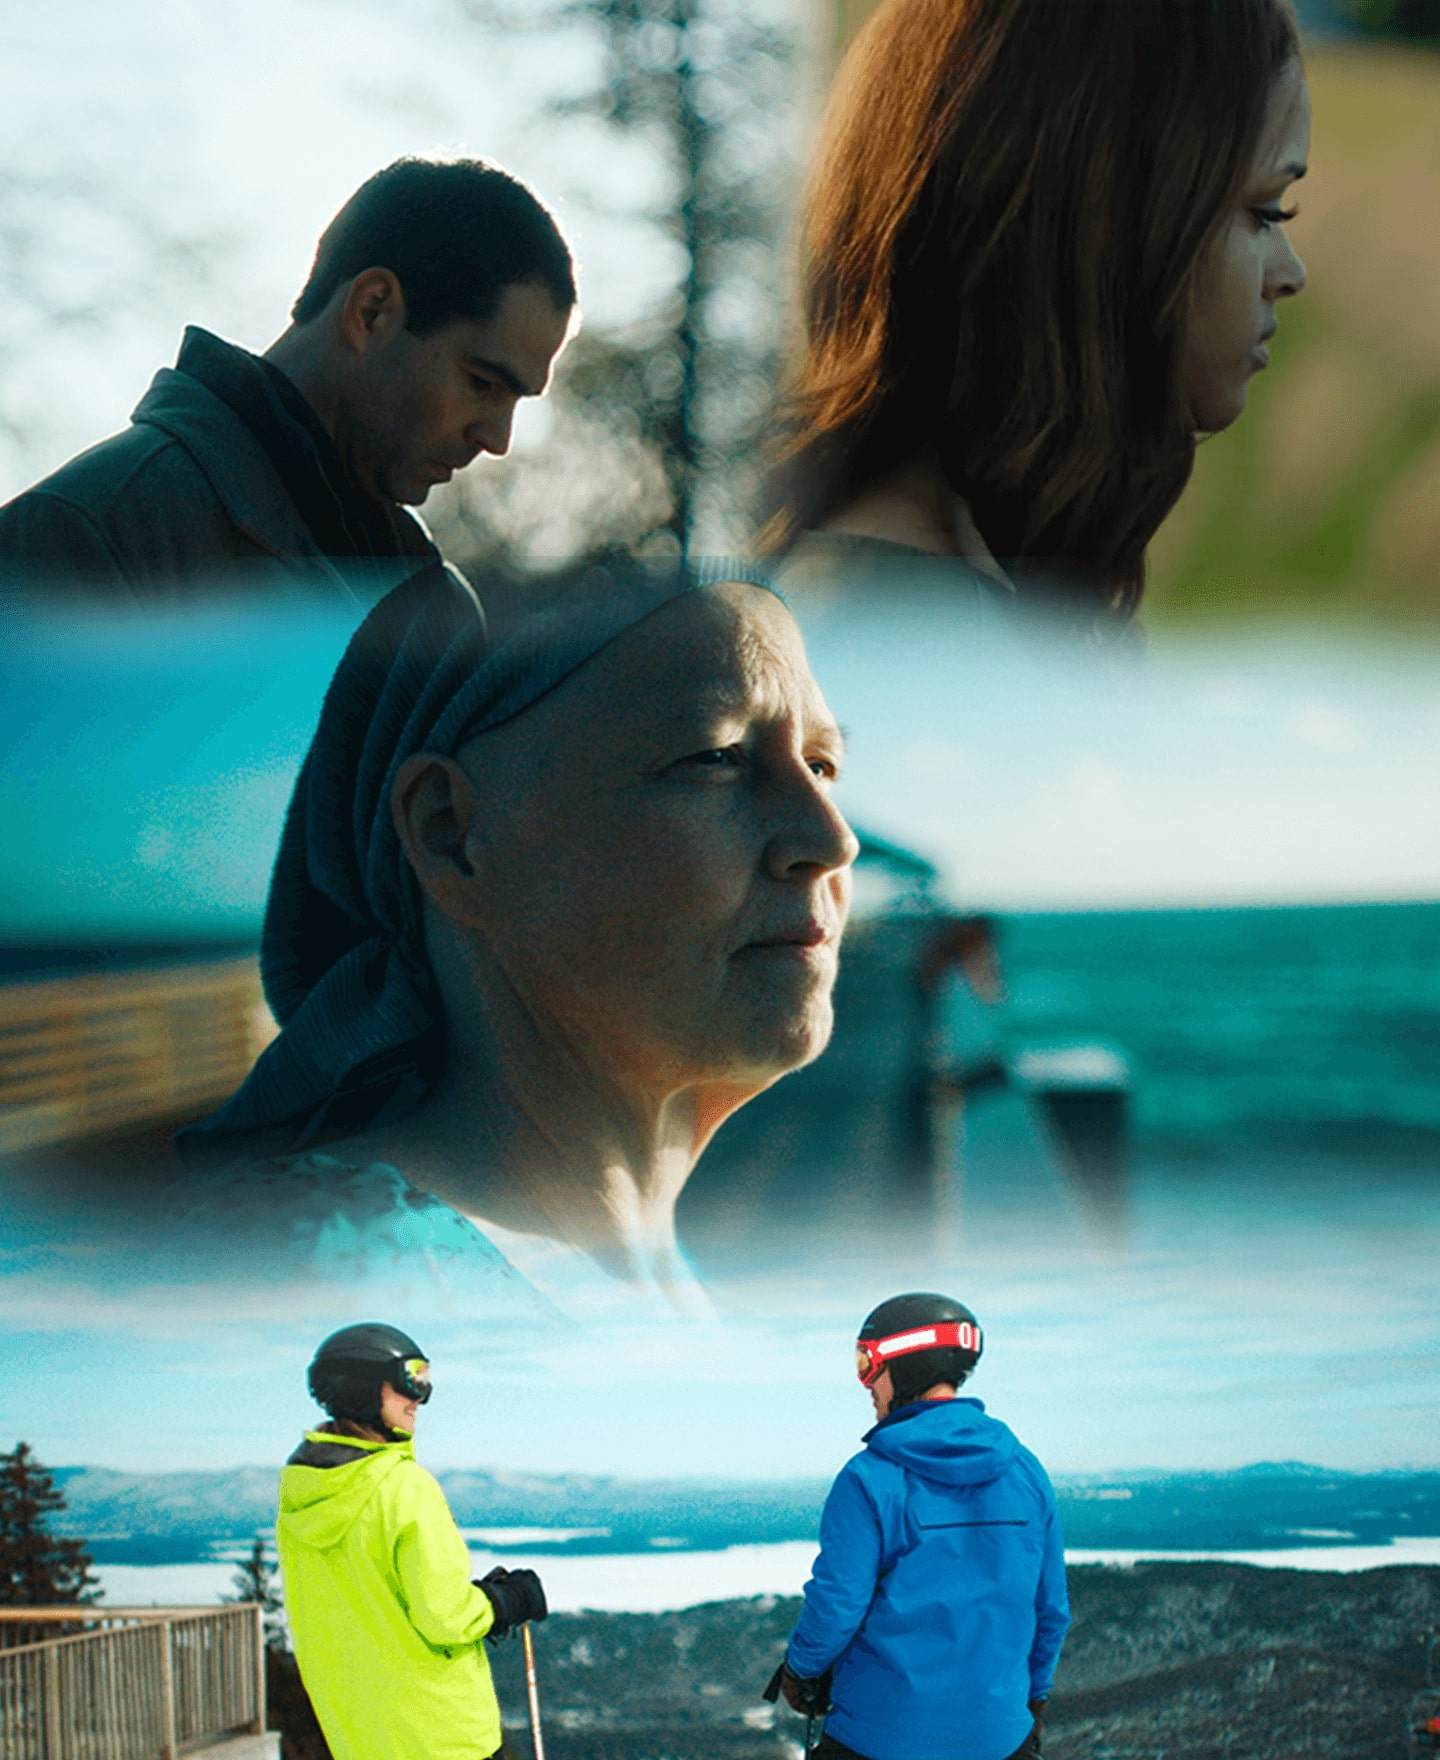 4 individual images of people; the first image is a woman with a headscarf; the second image is of 2 children wearing ski goggles; the third image is of a young man and woman hugging; the fourth image is a headshot of a young woman